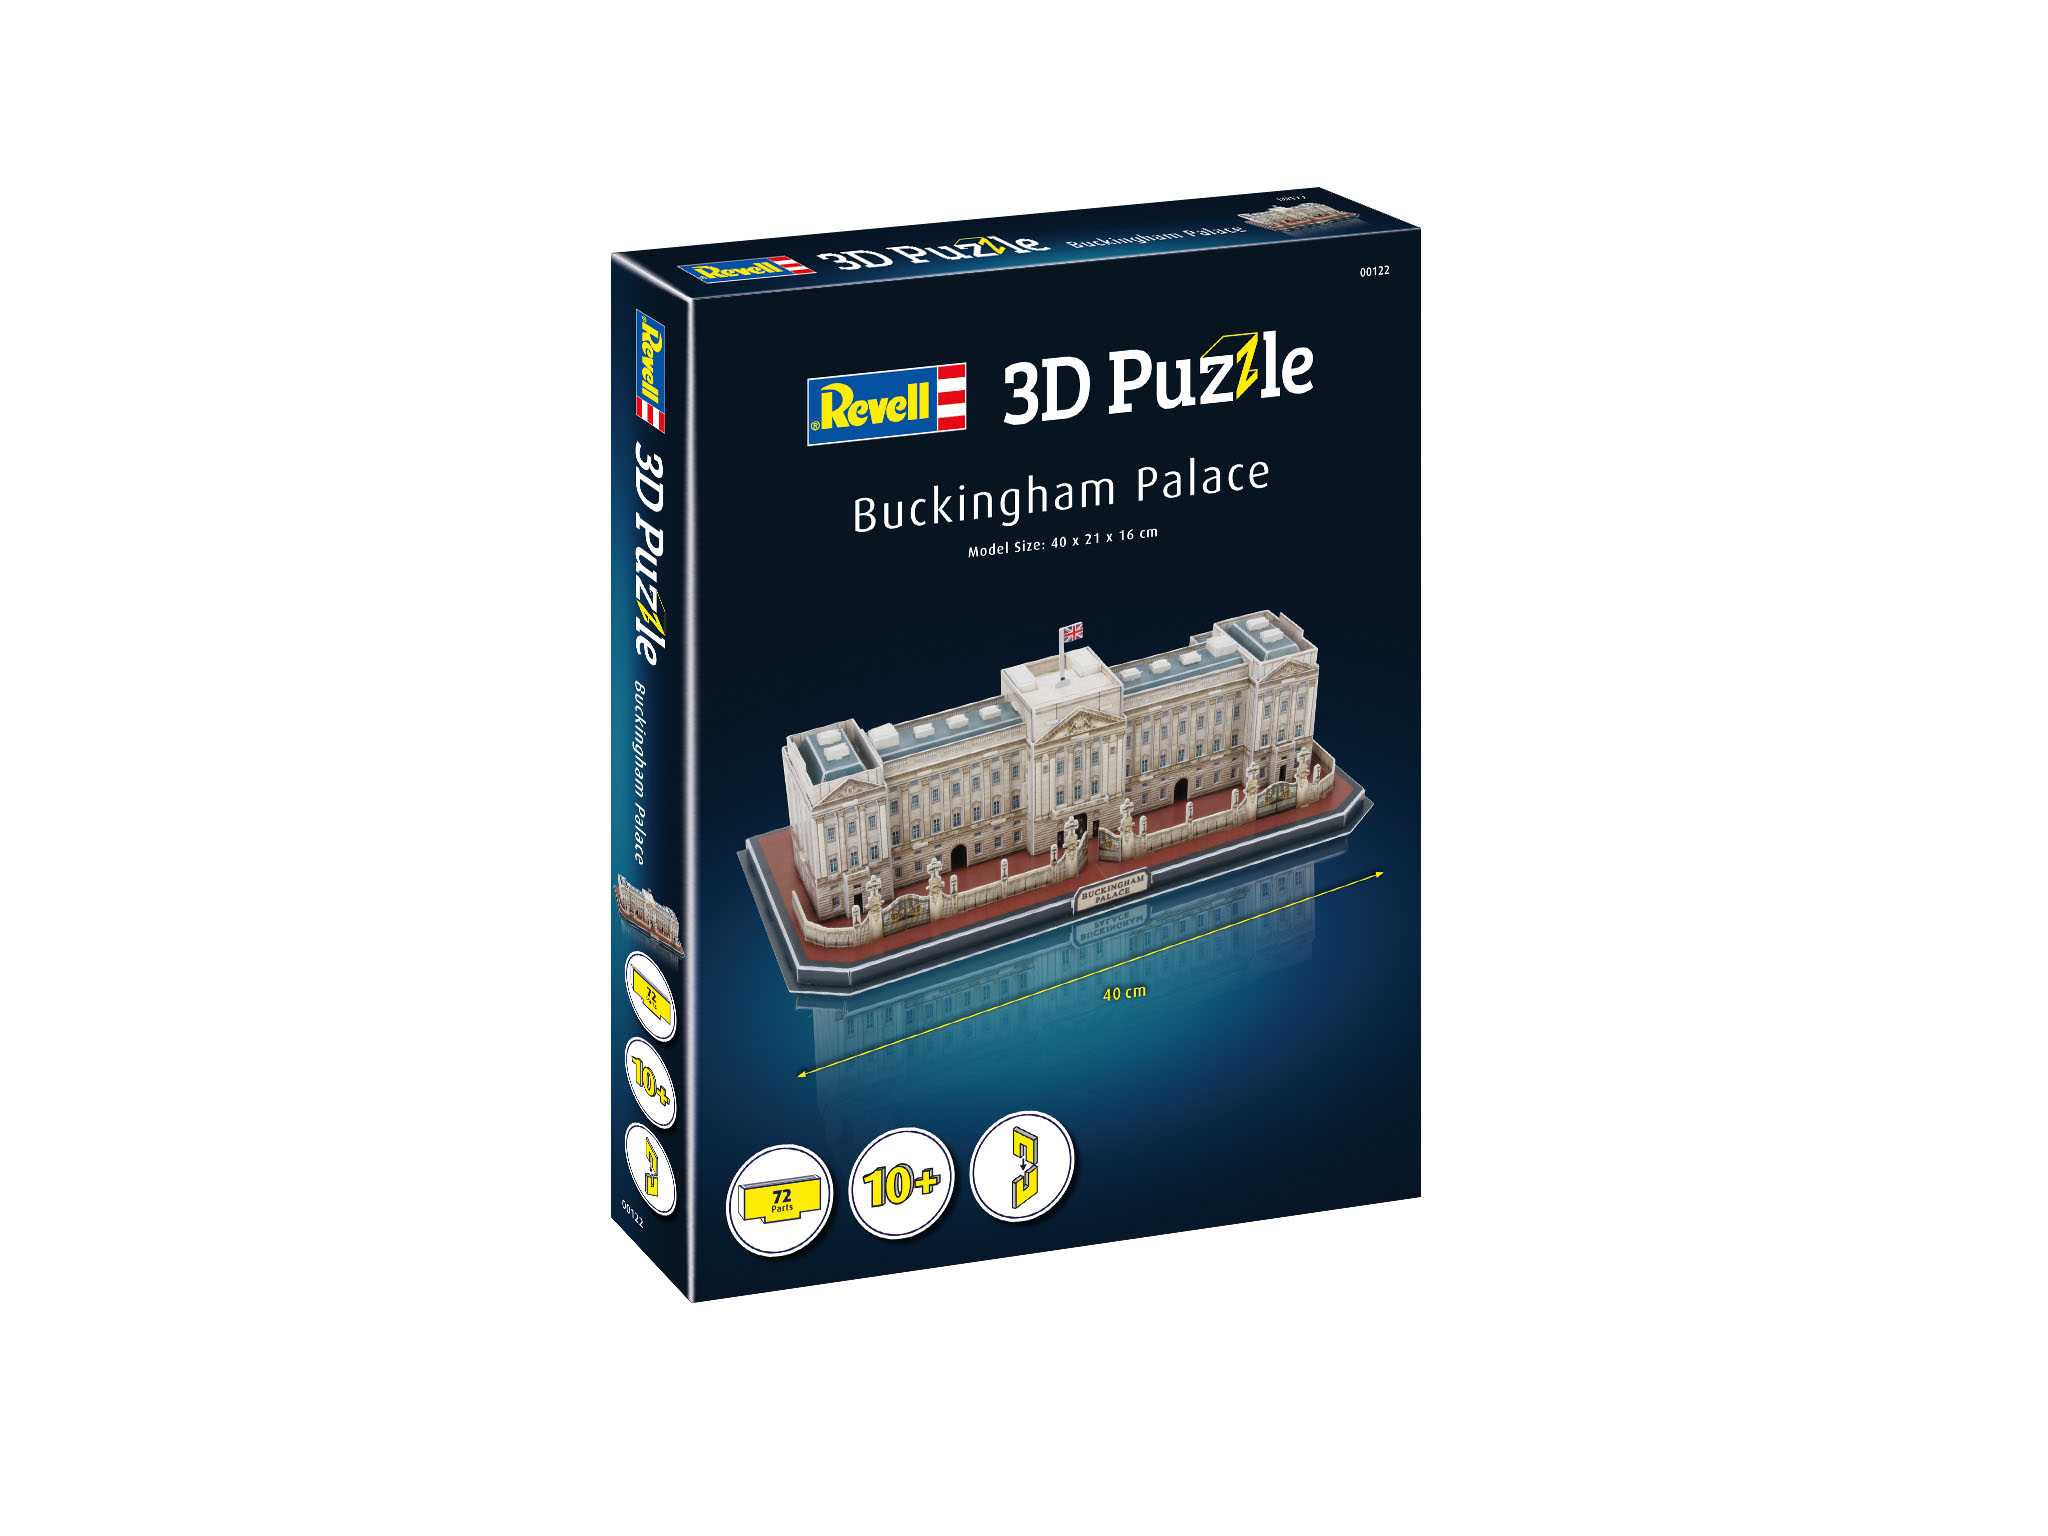 3D PuzzleRevell 00122 - Buckingham Palace